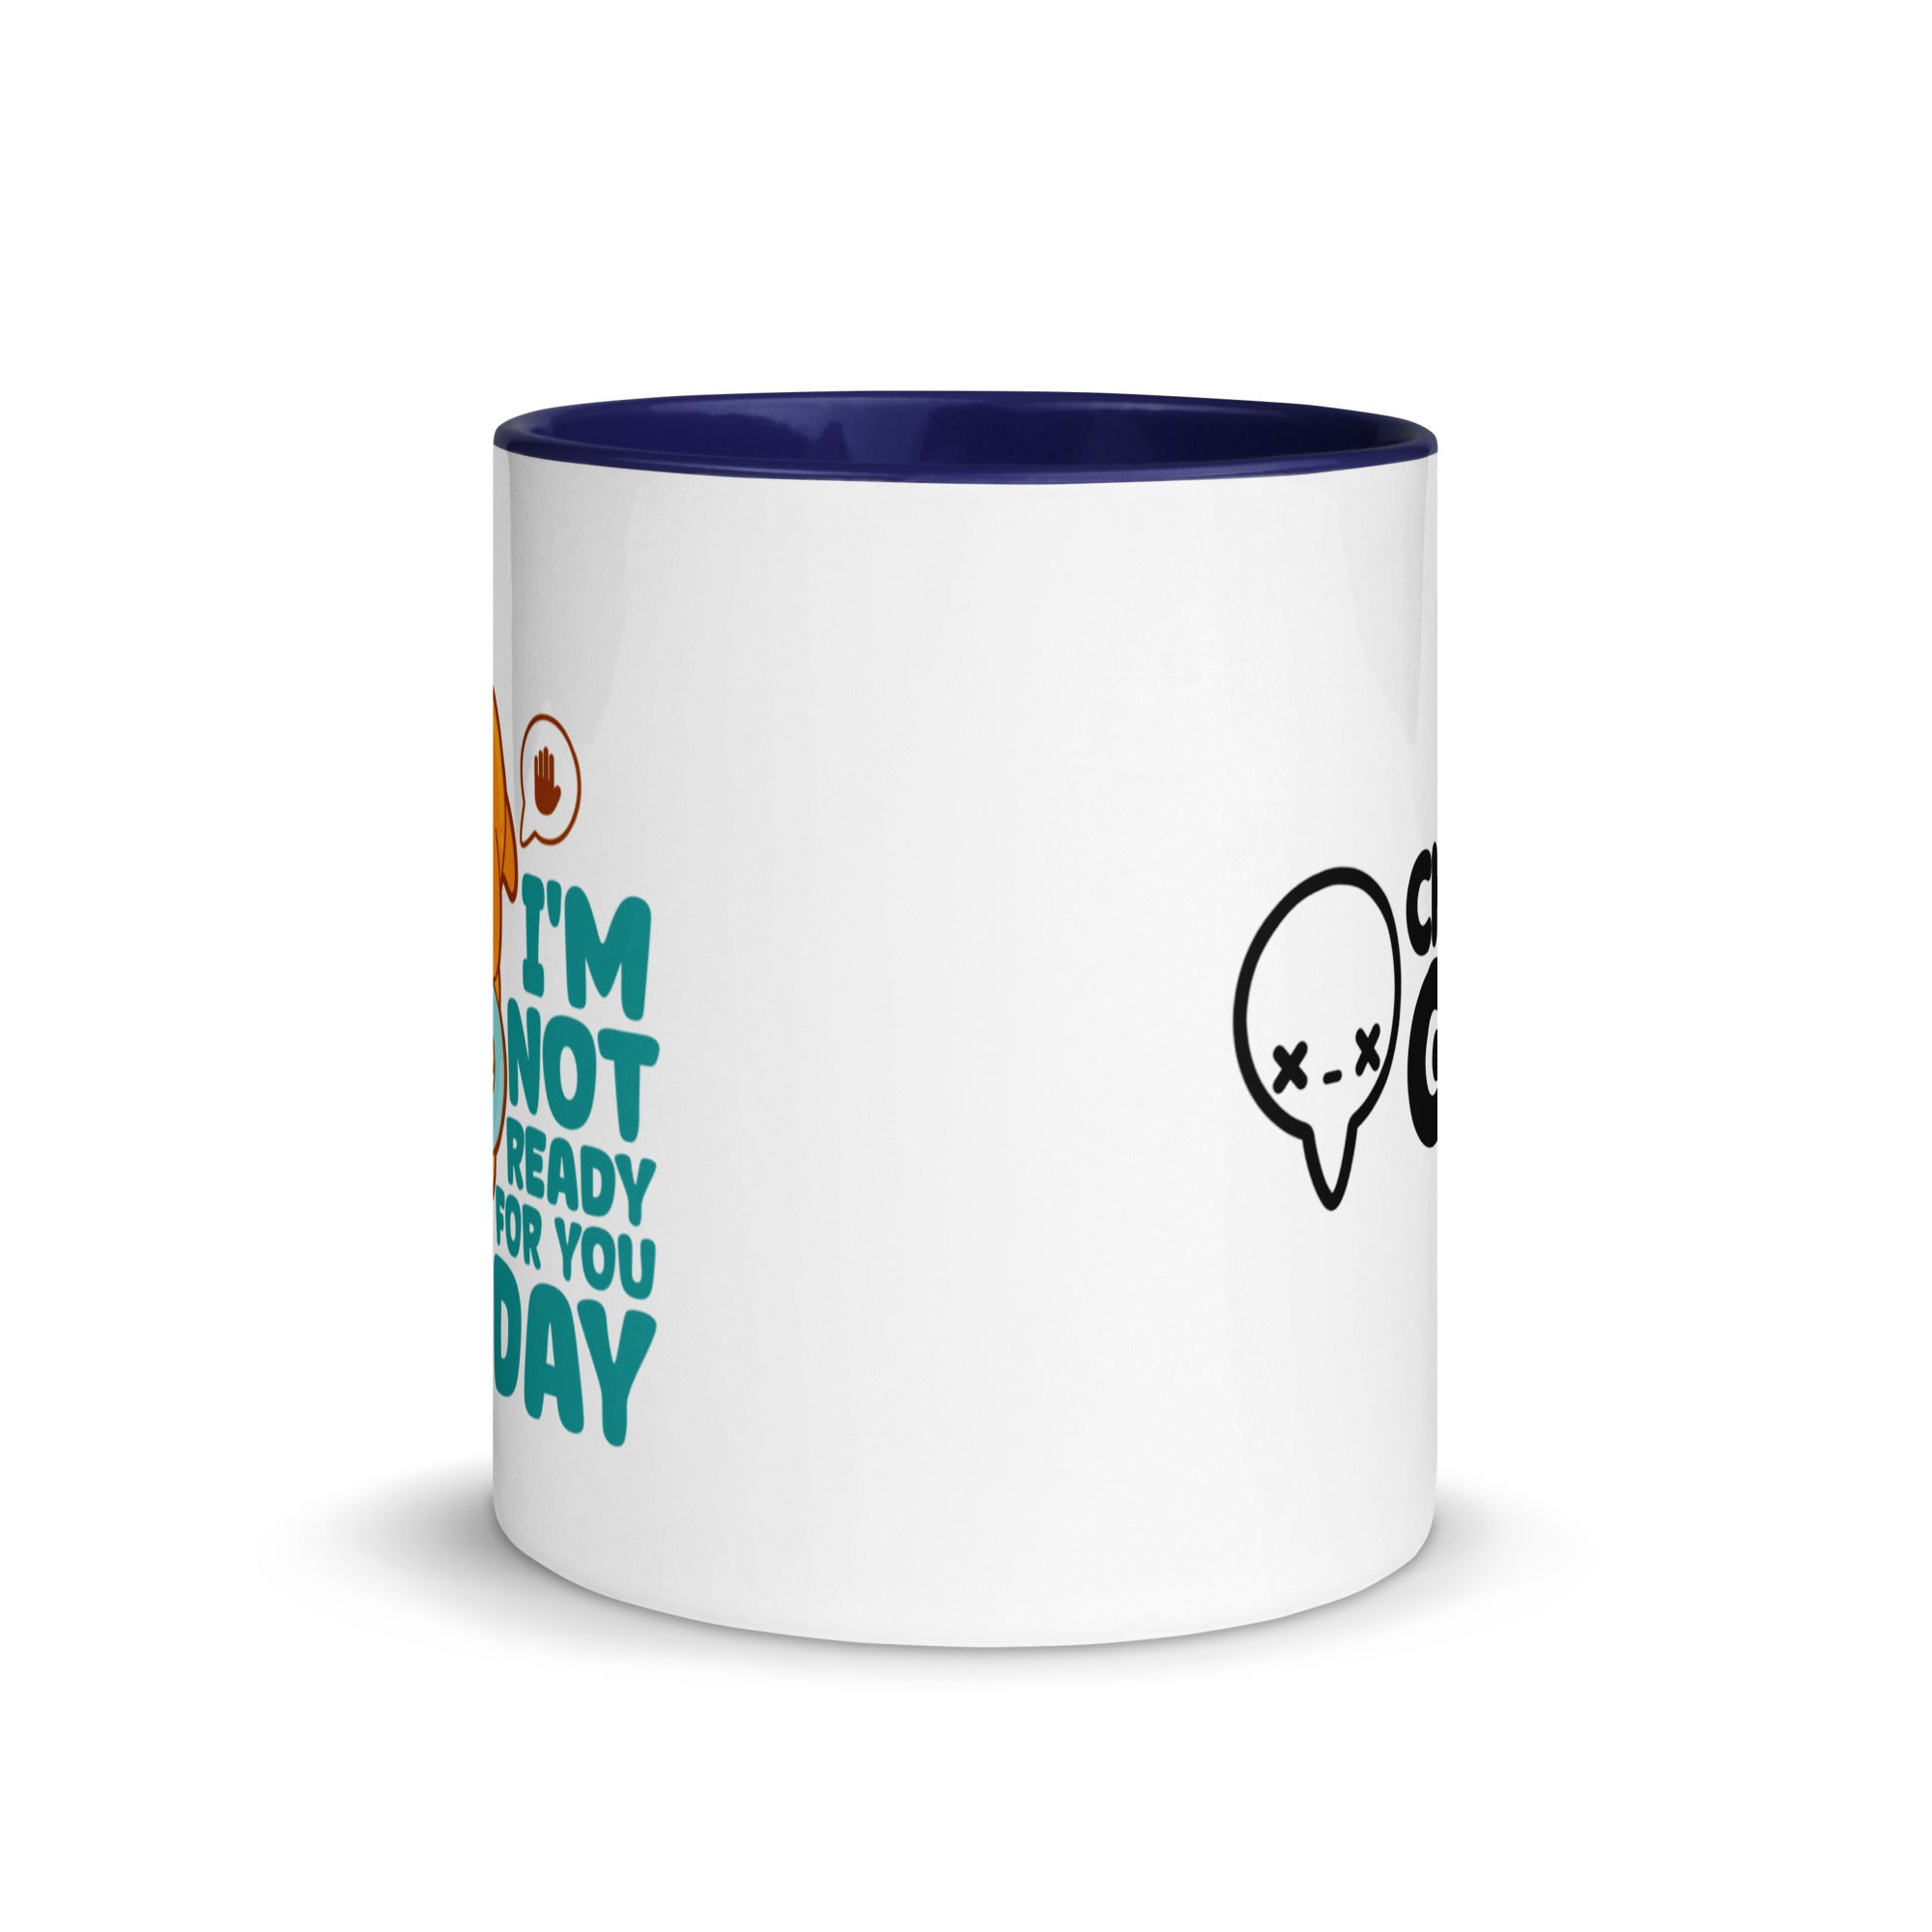 IM NOT READY FOR YOU TODAY - Mug with Color Inside - ChubbleGumLLC